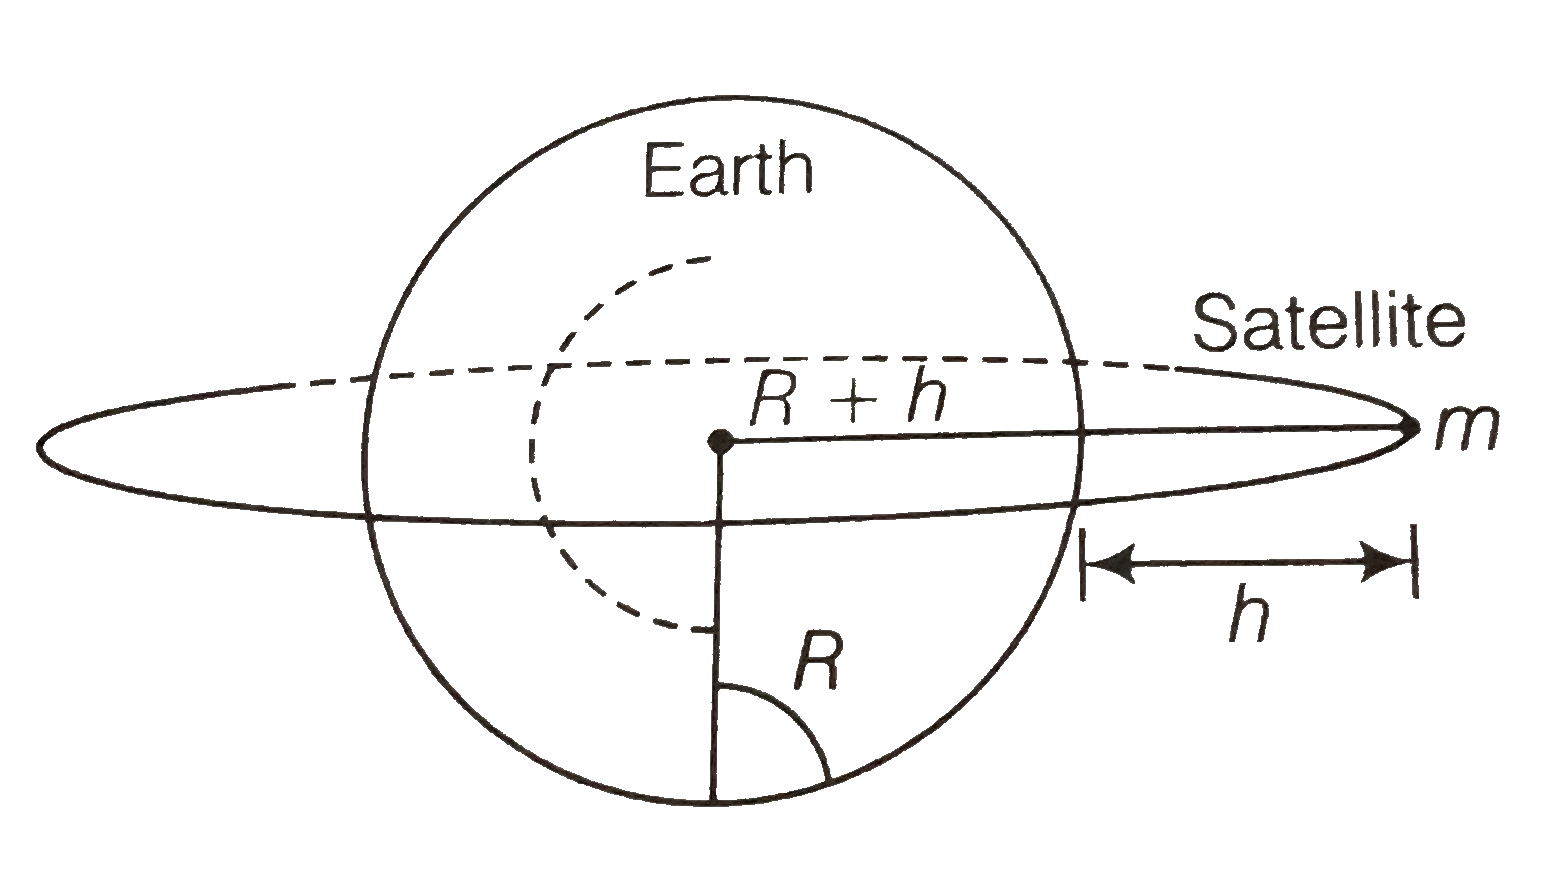 A satellite is to be placed in equatorial geostationary orbit around the earth for communication.   (a) Calculate height of such a satellite   (b) Find out the minimum number of satellites that are needed to cover entire earth, so that atleast one satellite is visible from any point on the equator.      [M = 6 xx 10^(24) kg, R = 6400 km, T = 24 h, G = 6.67 xx 10^(-11)